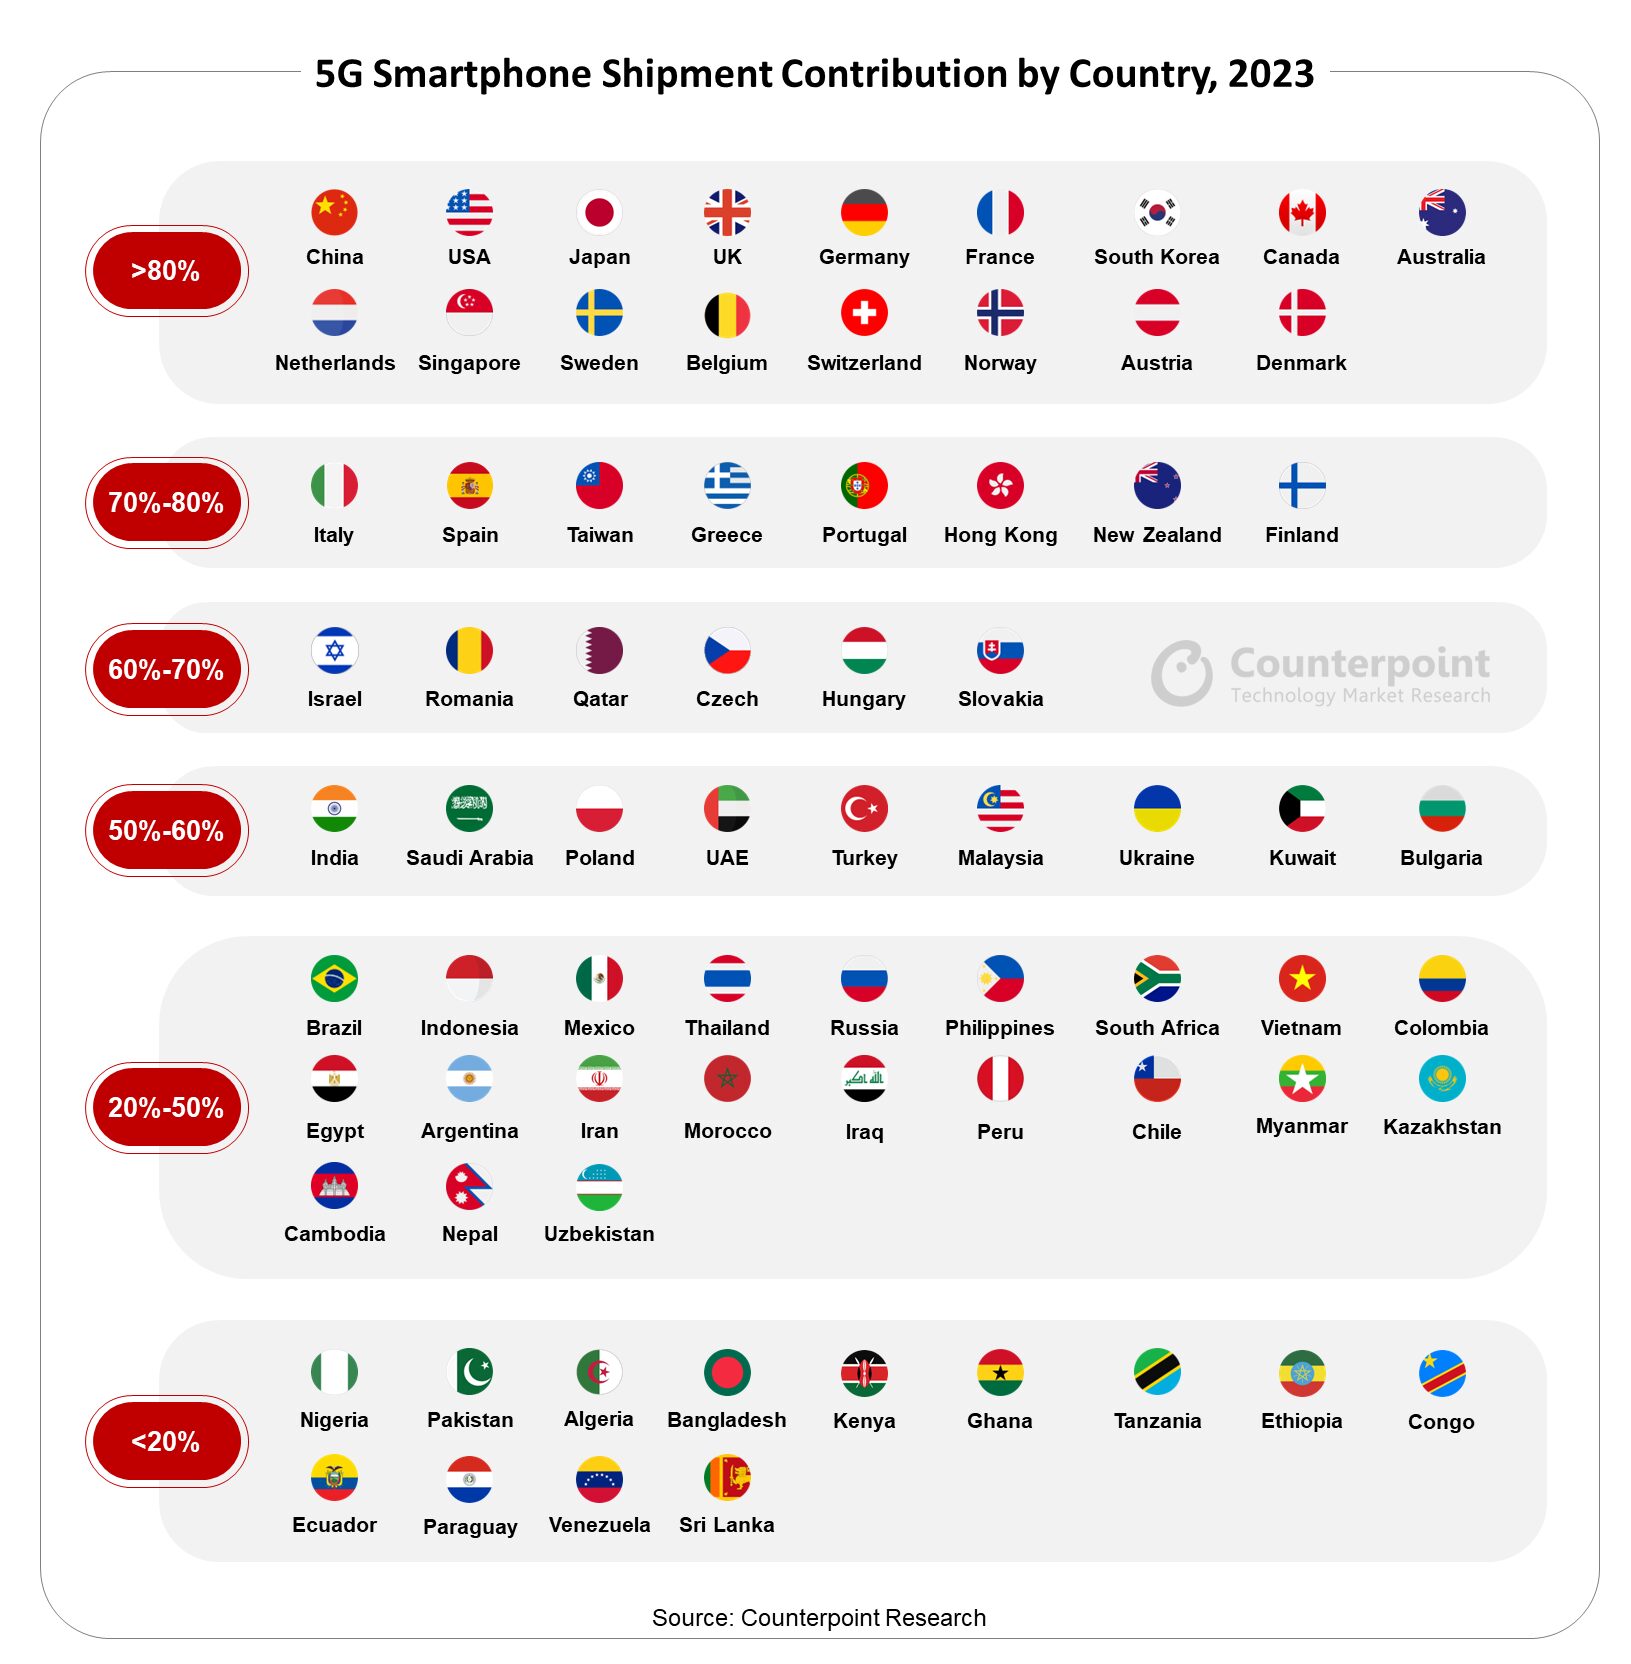 5G Smartphone Shipment Contribution by Country, 2023